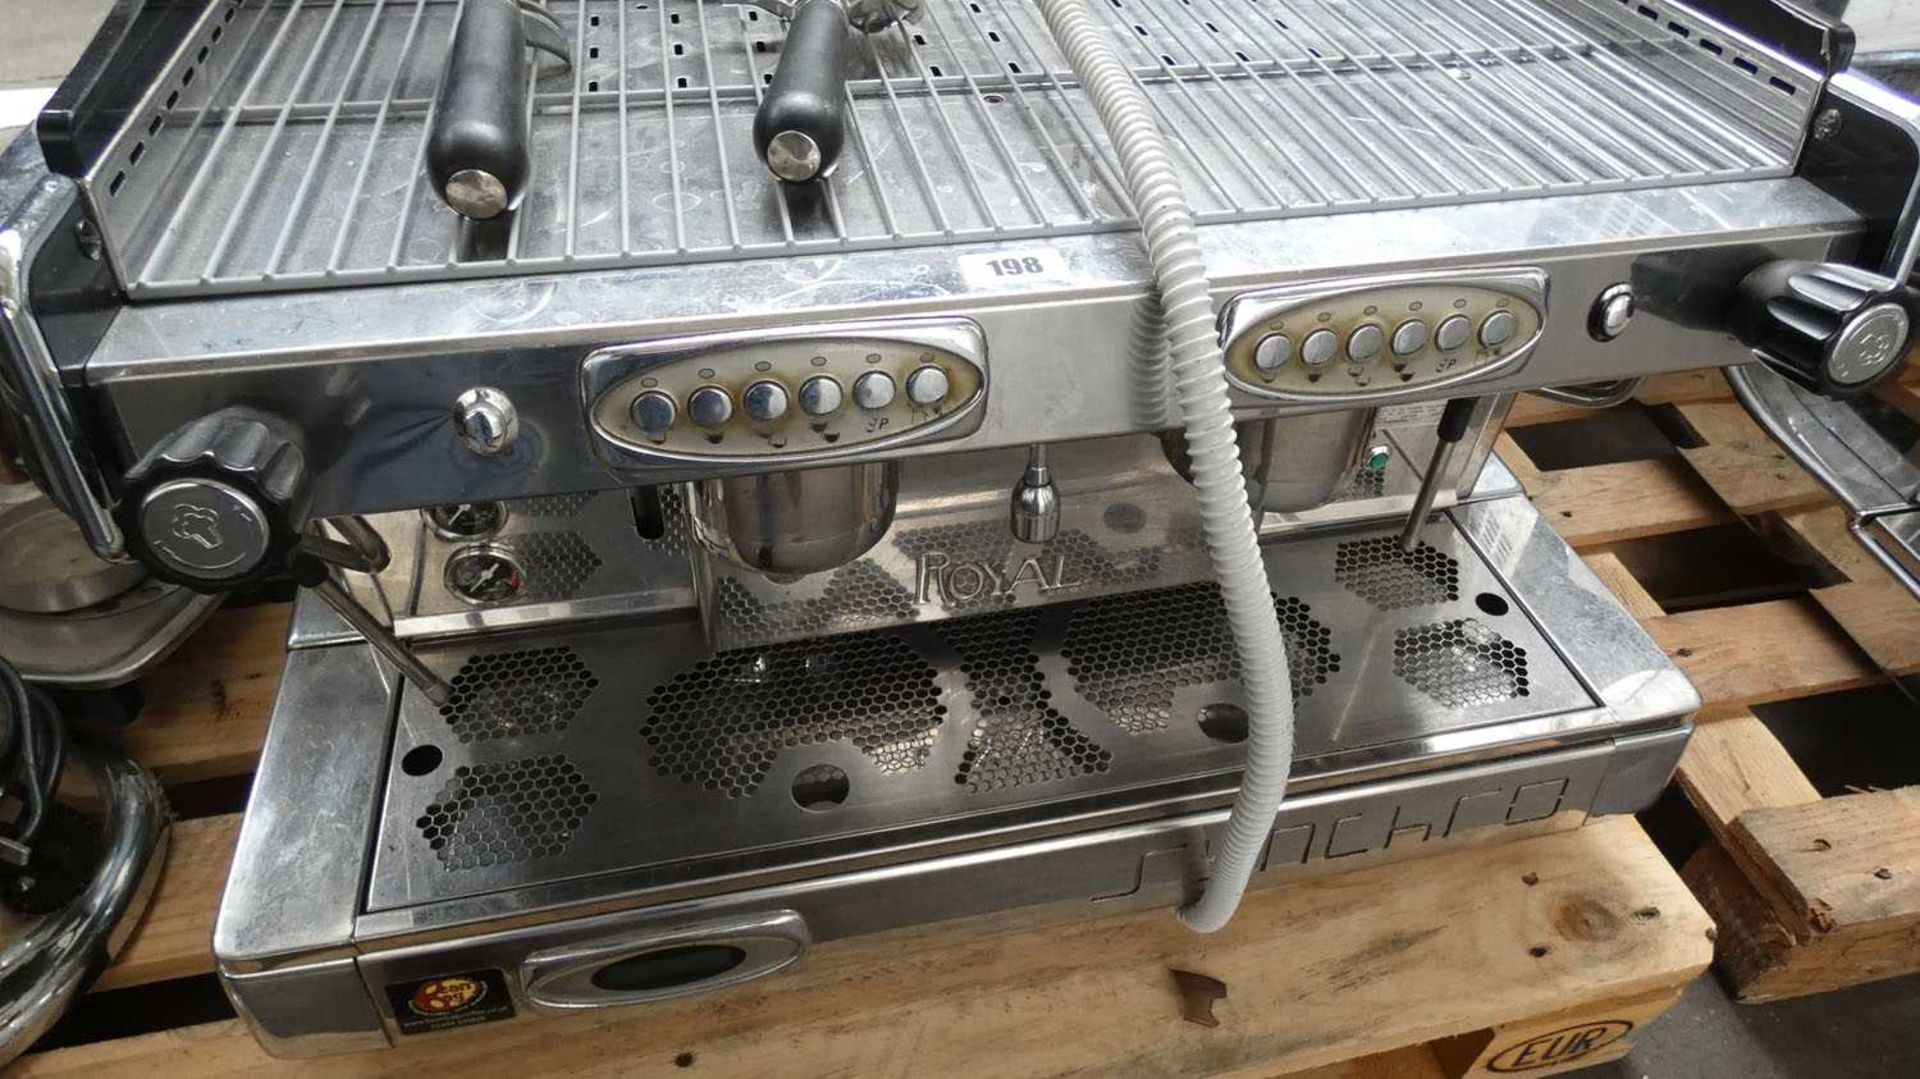 75cm Synchro Royal automatic barista 2 station coffee machine with 2 groupheads and associated - Image 3 of 3